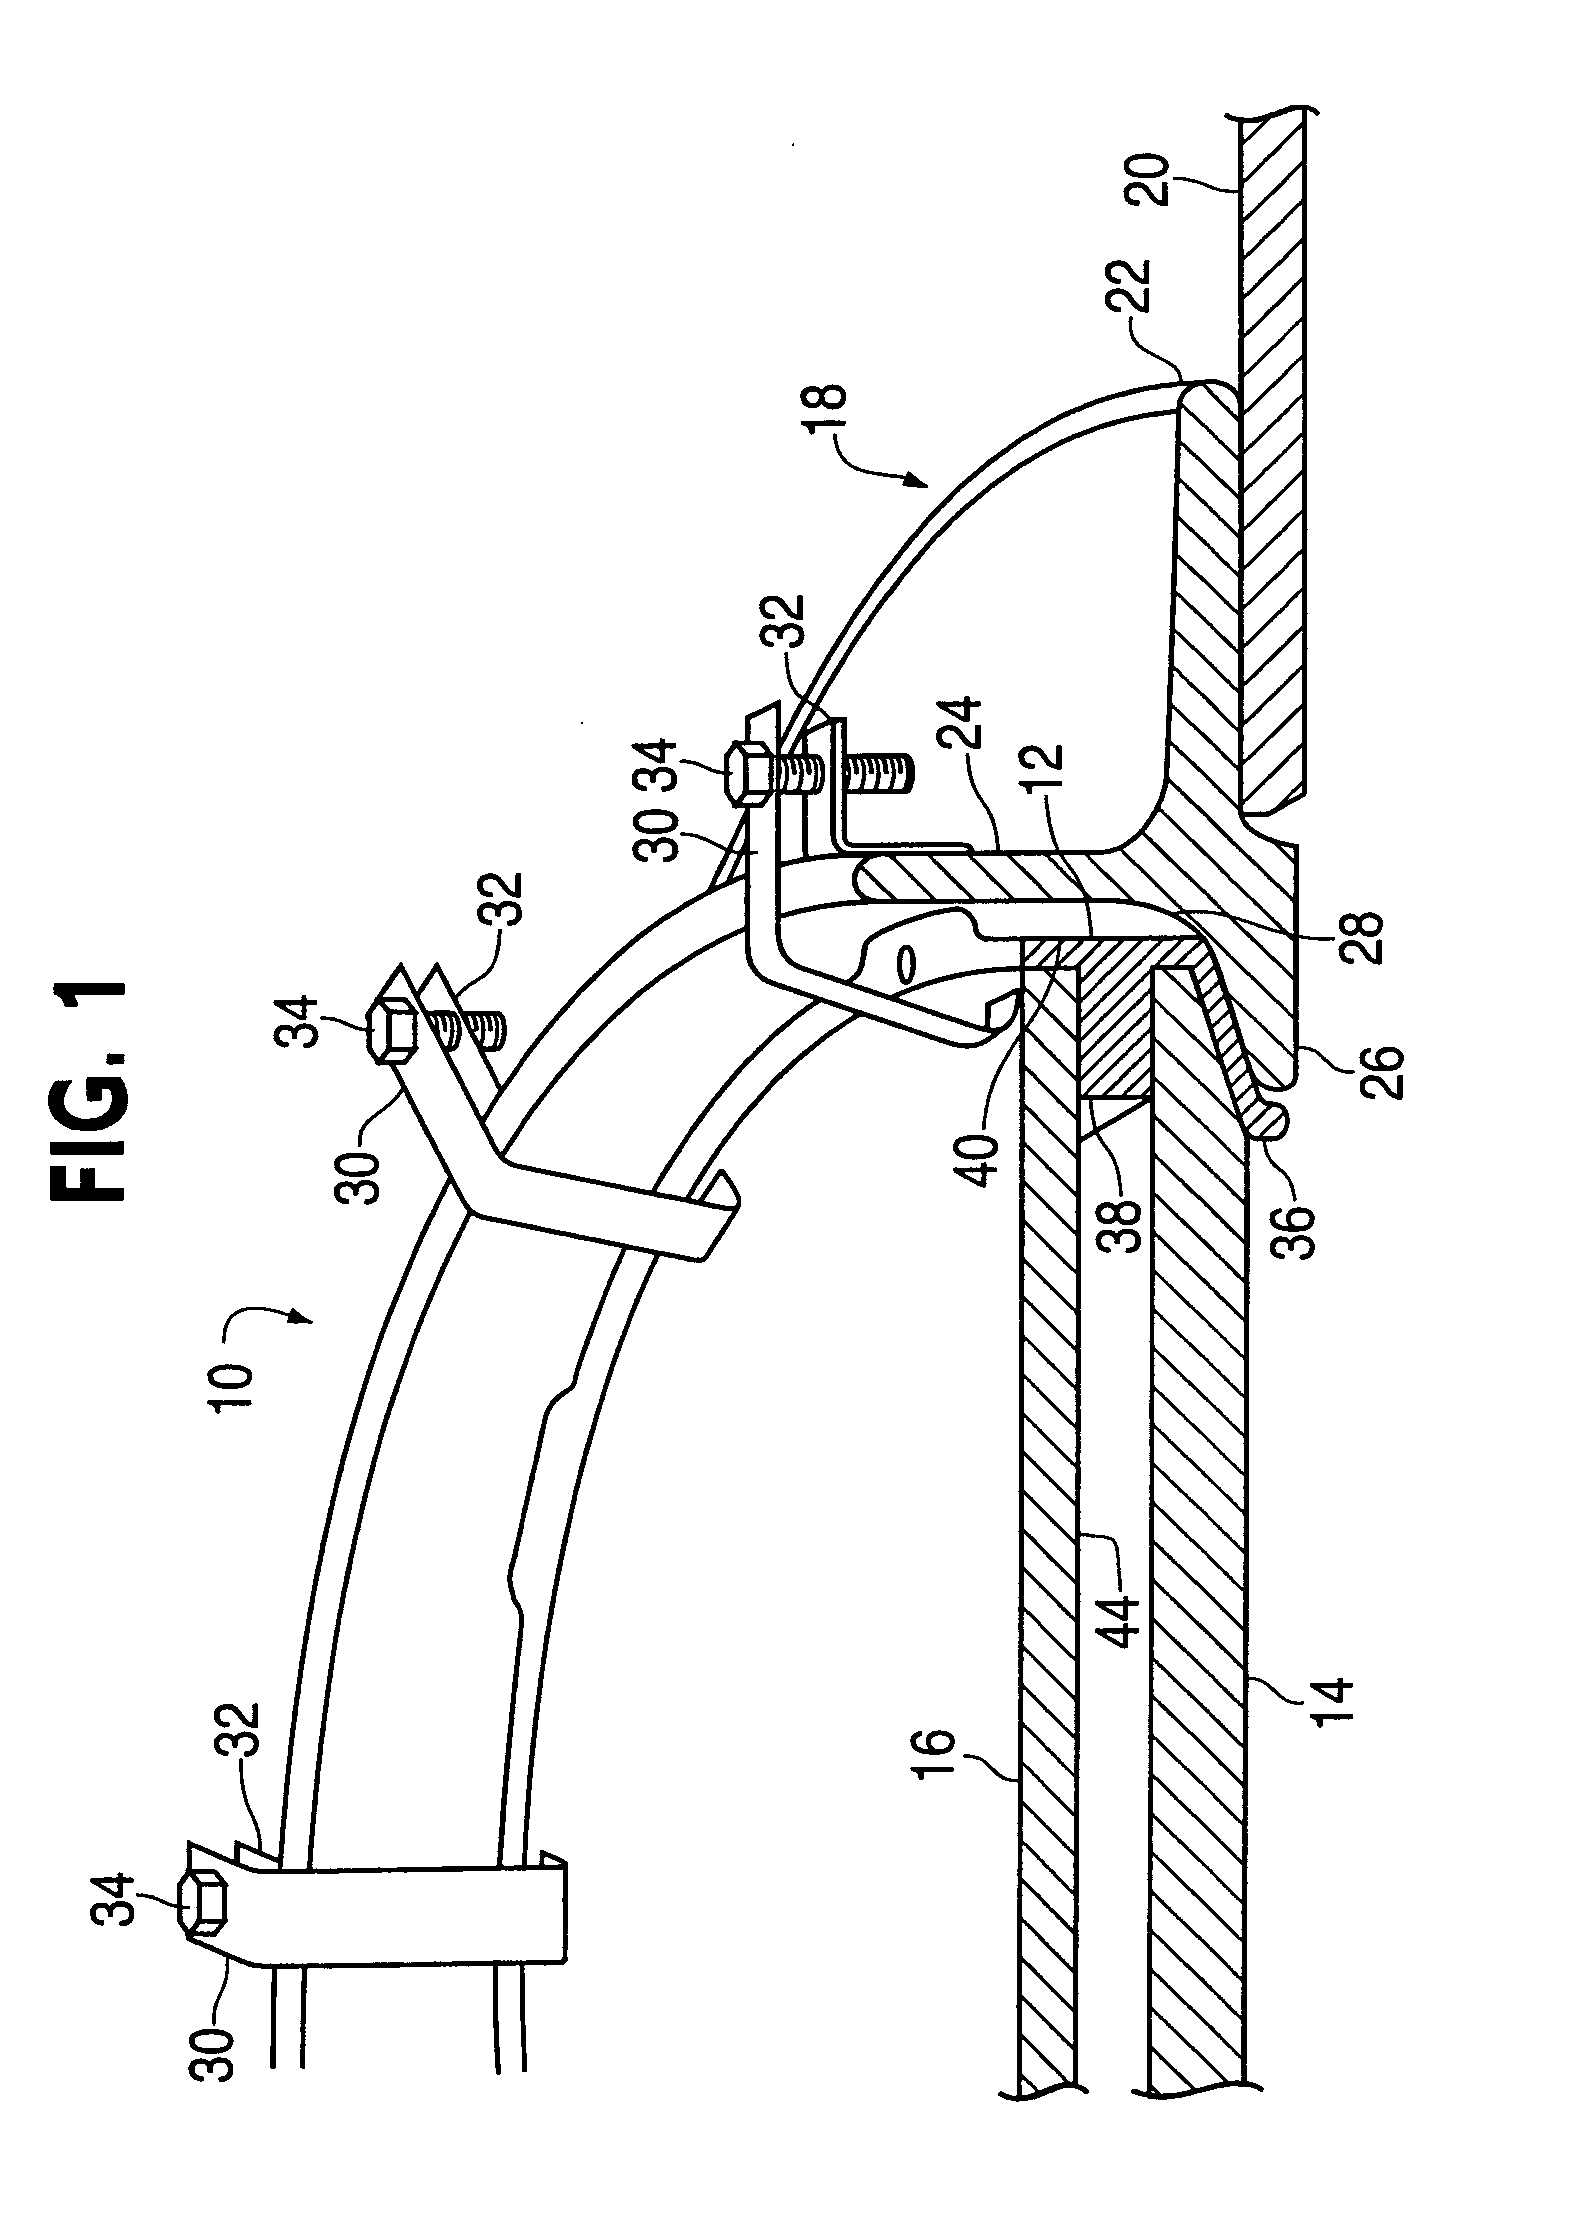 Conductive gasket apparatus and method